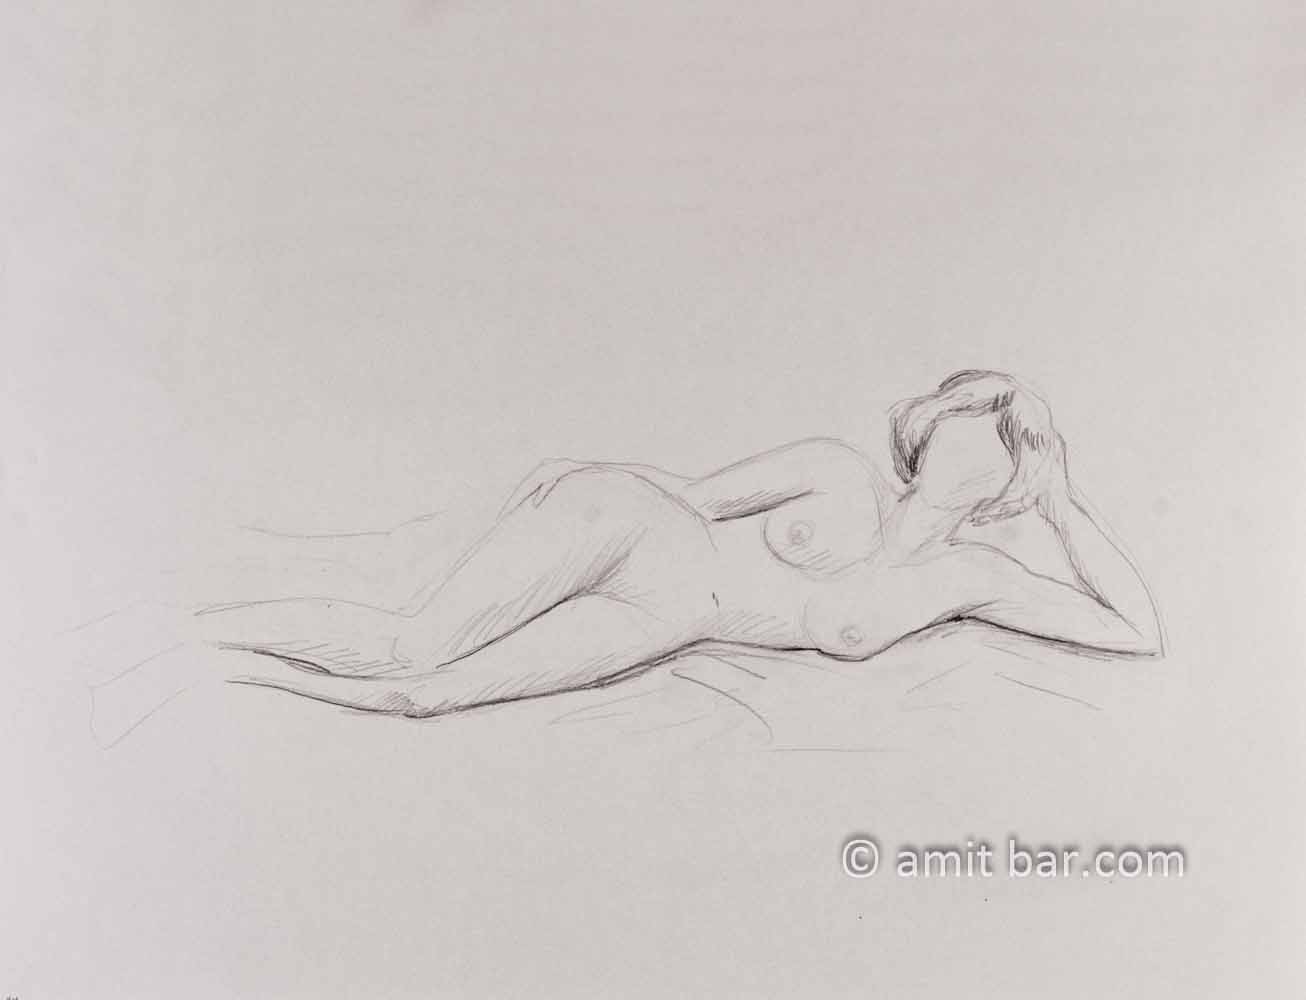 Nude figure leaning on elbow. Pencil drawing